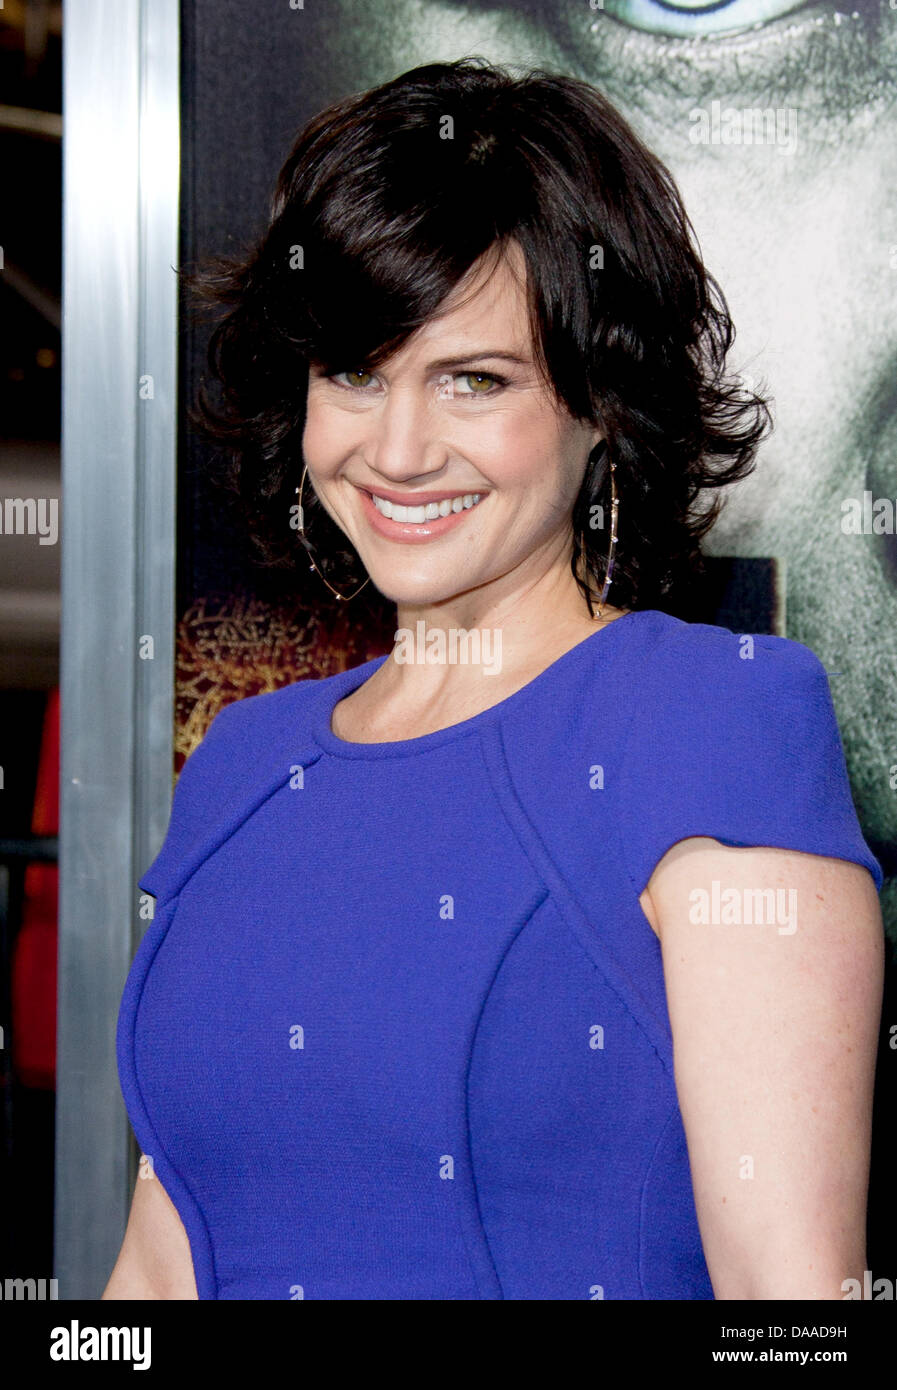 Actress Carla Gugino attends the World Premiere of the film 'The Rite' at Grauman's Chinese Theatre in Los Angeles, USA, 26 January 2011. Photo: Hubert Boesl Stock Photo